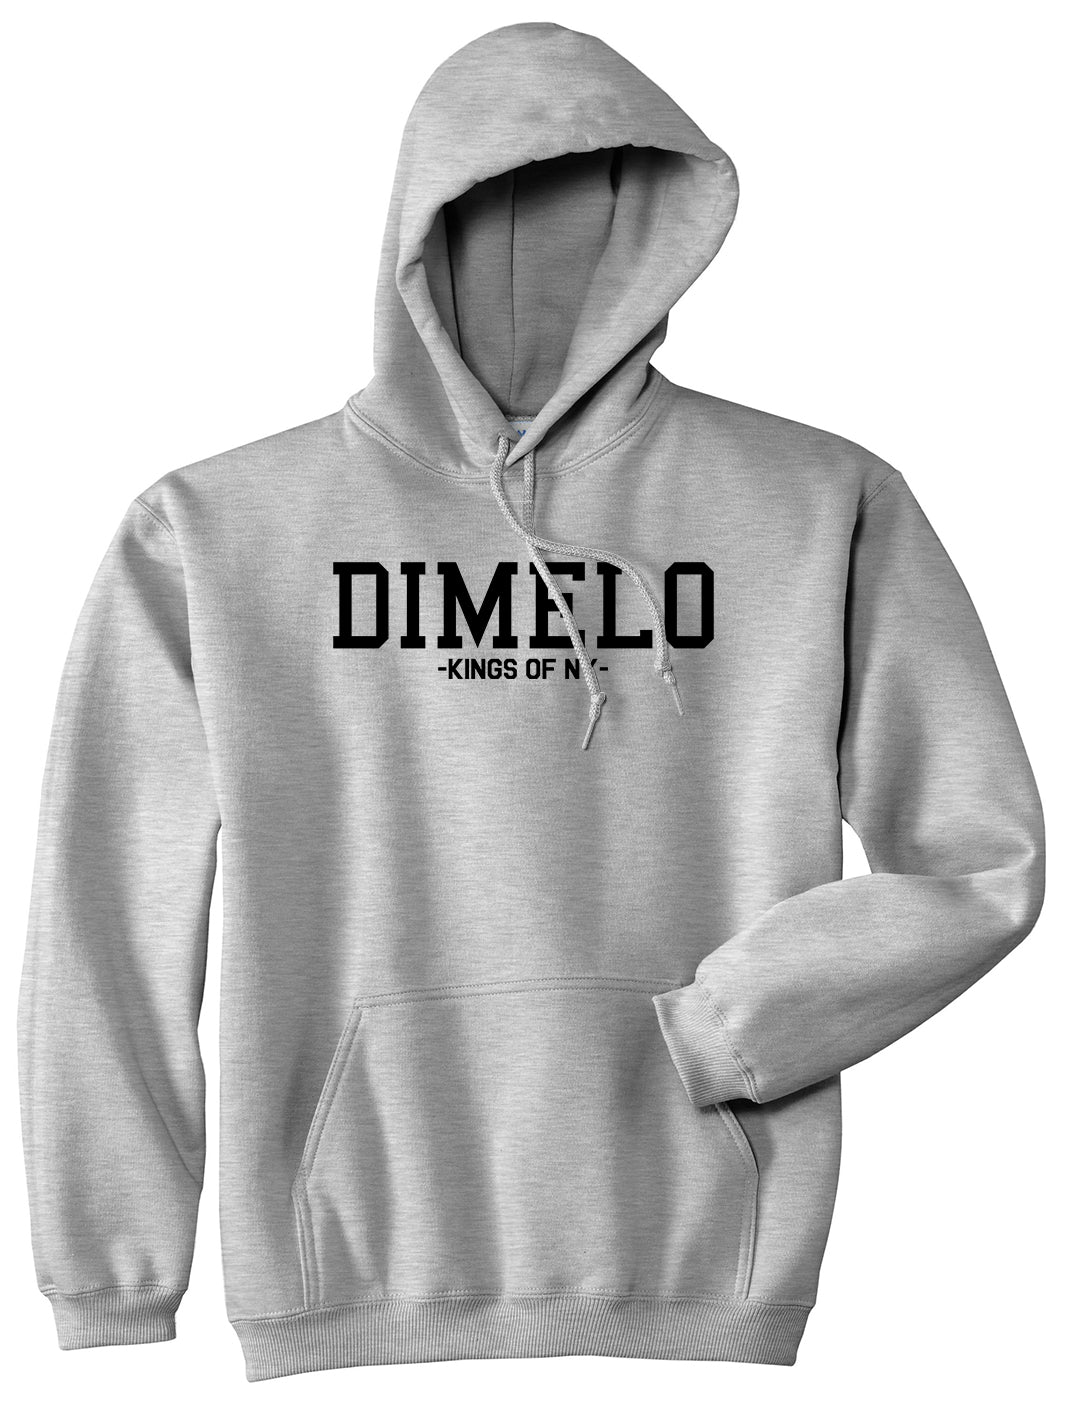 Dimelo Kings Of NY Pullover Hoodie in Grey